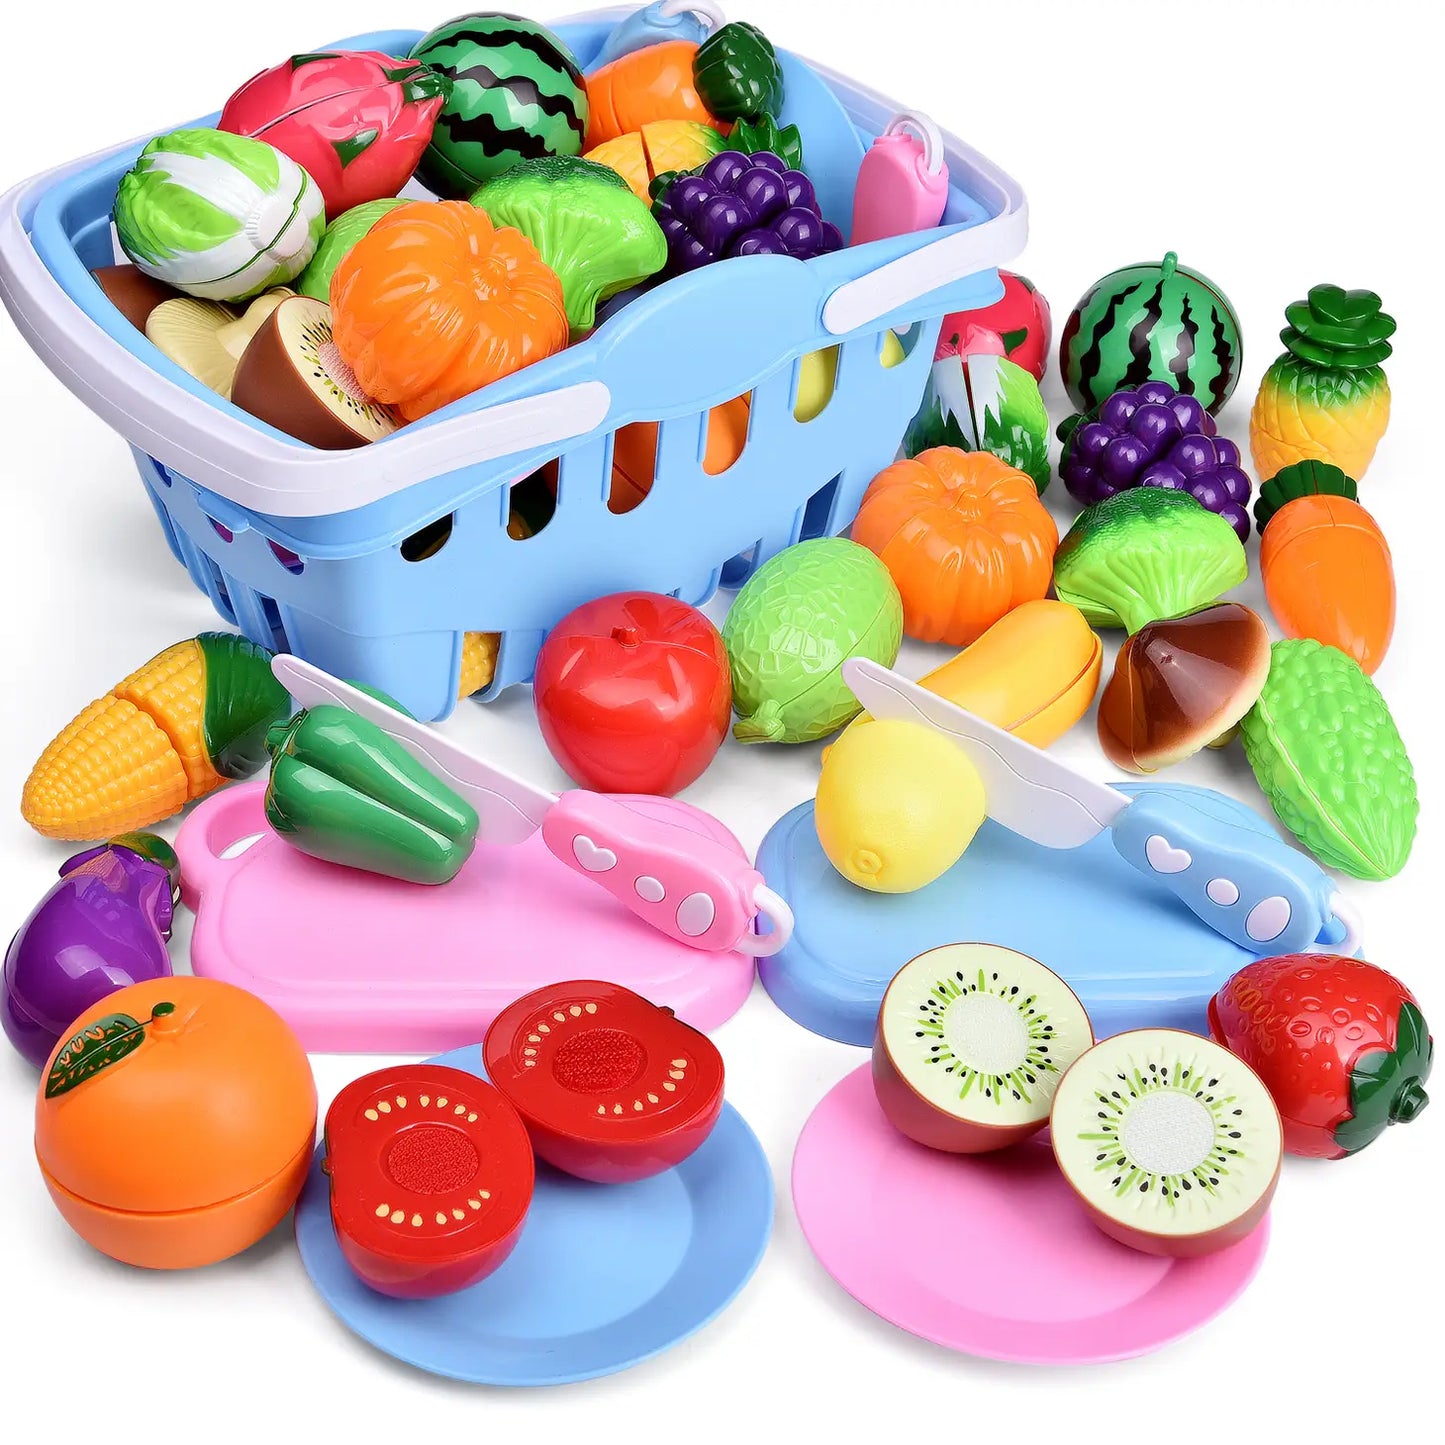 53 Pcs Play Food For Kids Kitchen Pretend Cutting Food Toys